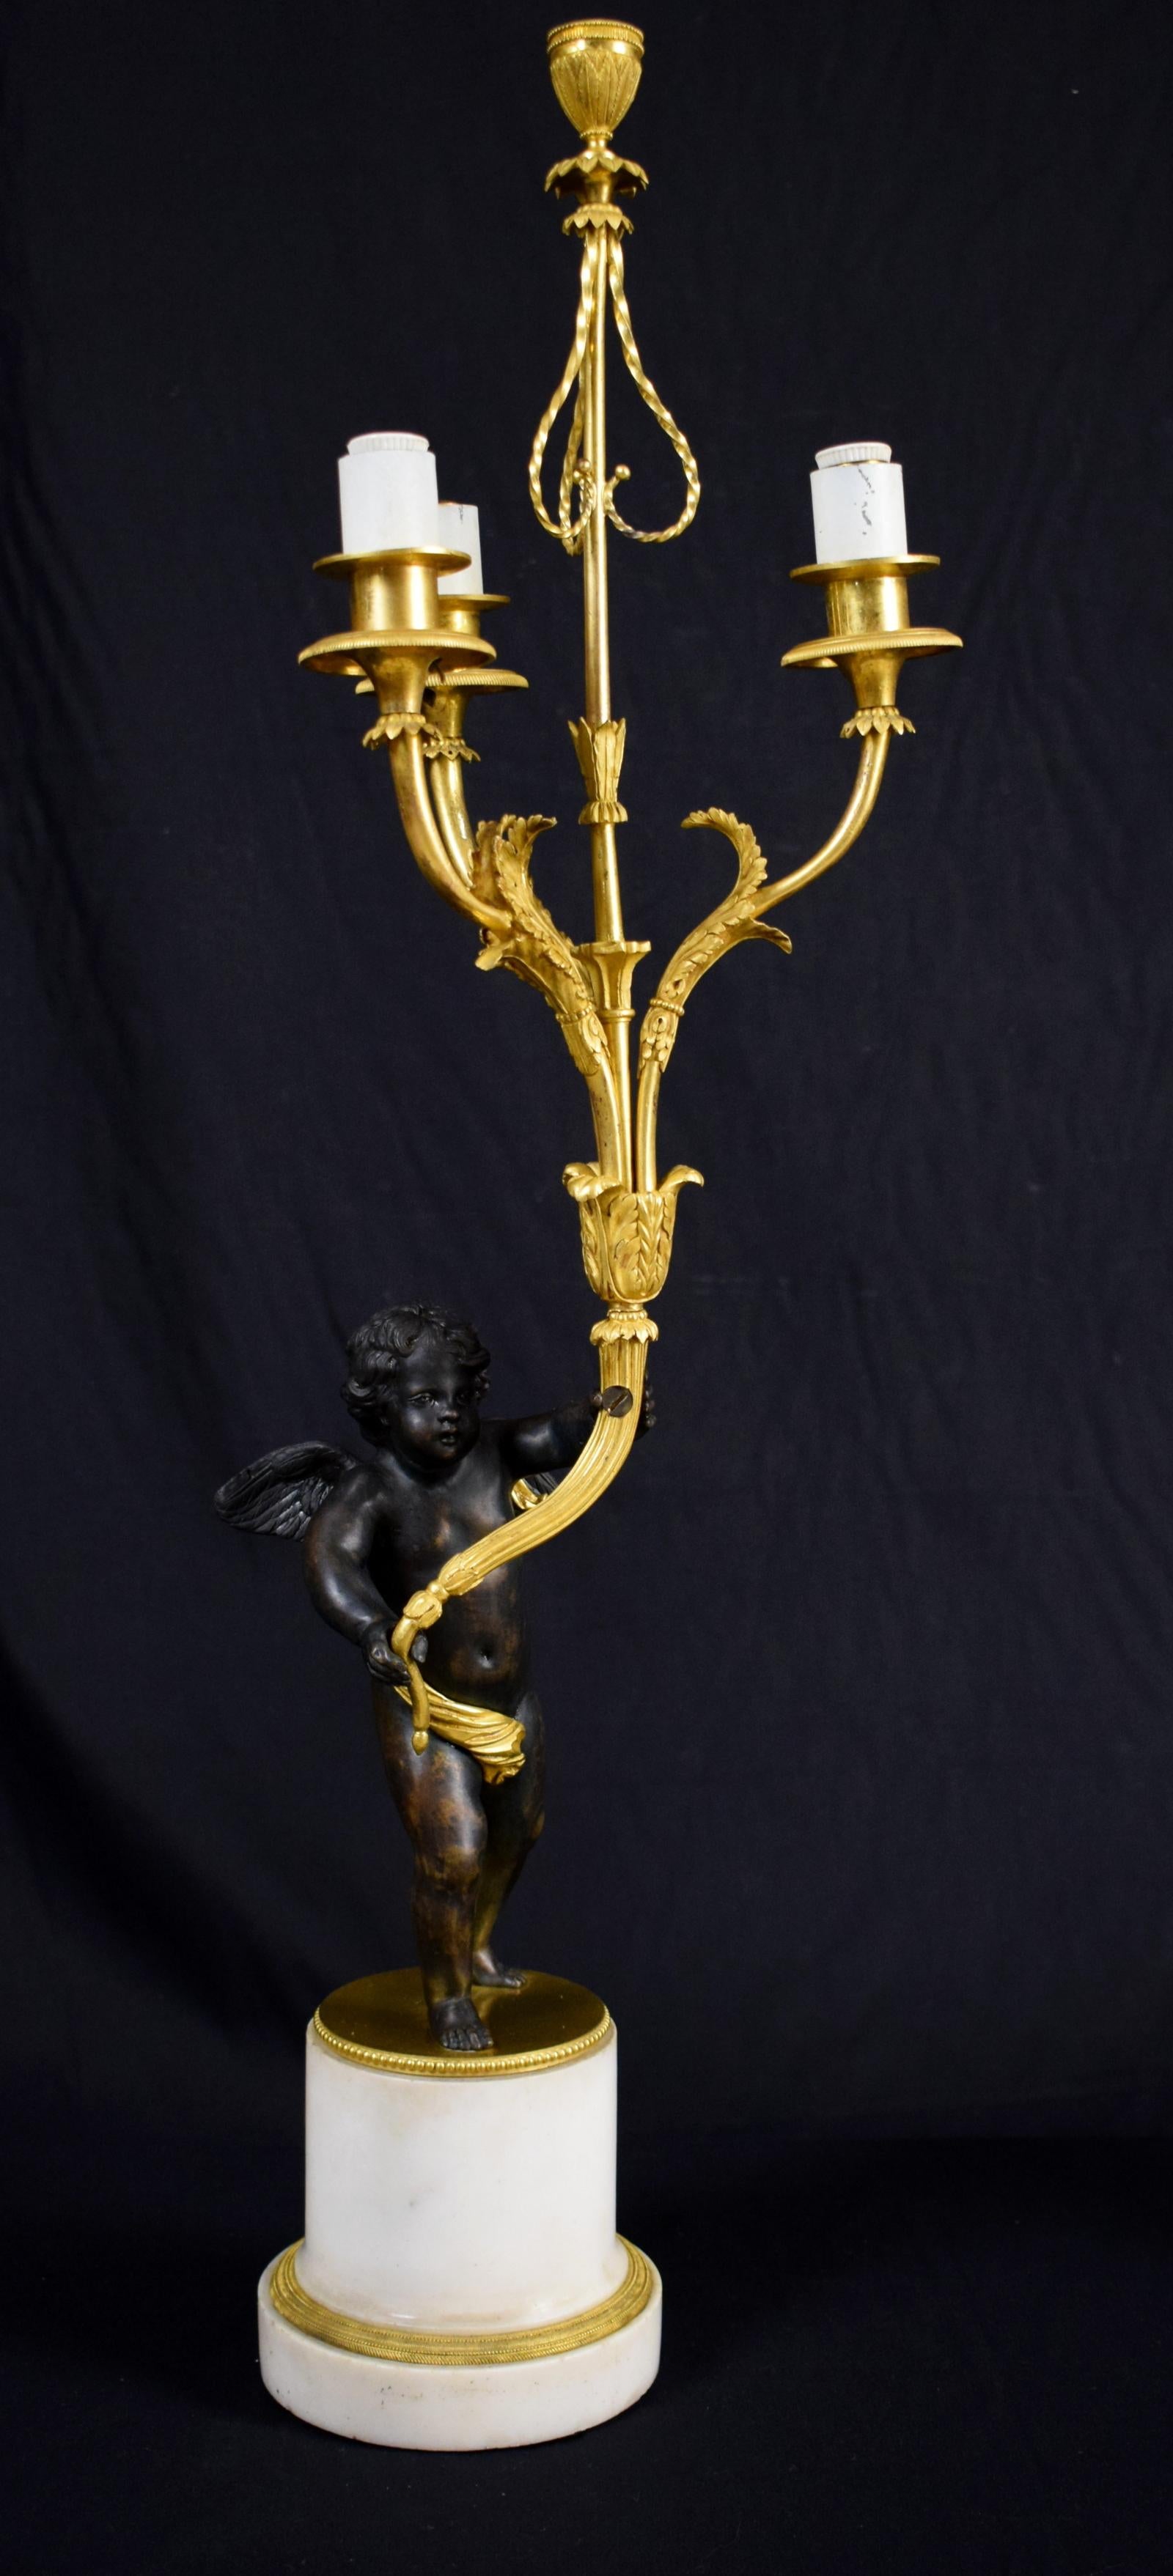 Pair of four-light gilded bronze candlesticks with patinated bronze putti and white marble base,
Second half of the 18th century, France

The pair of delicious candlesticks was made in France in the second half of the 18th century, Louis XVI. The